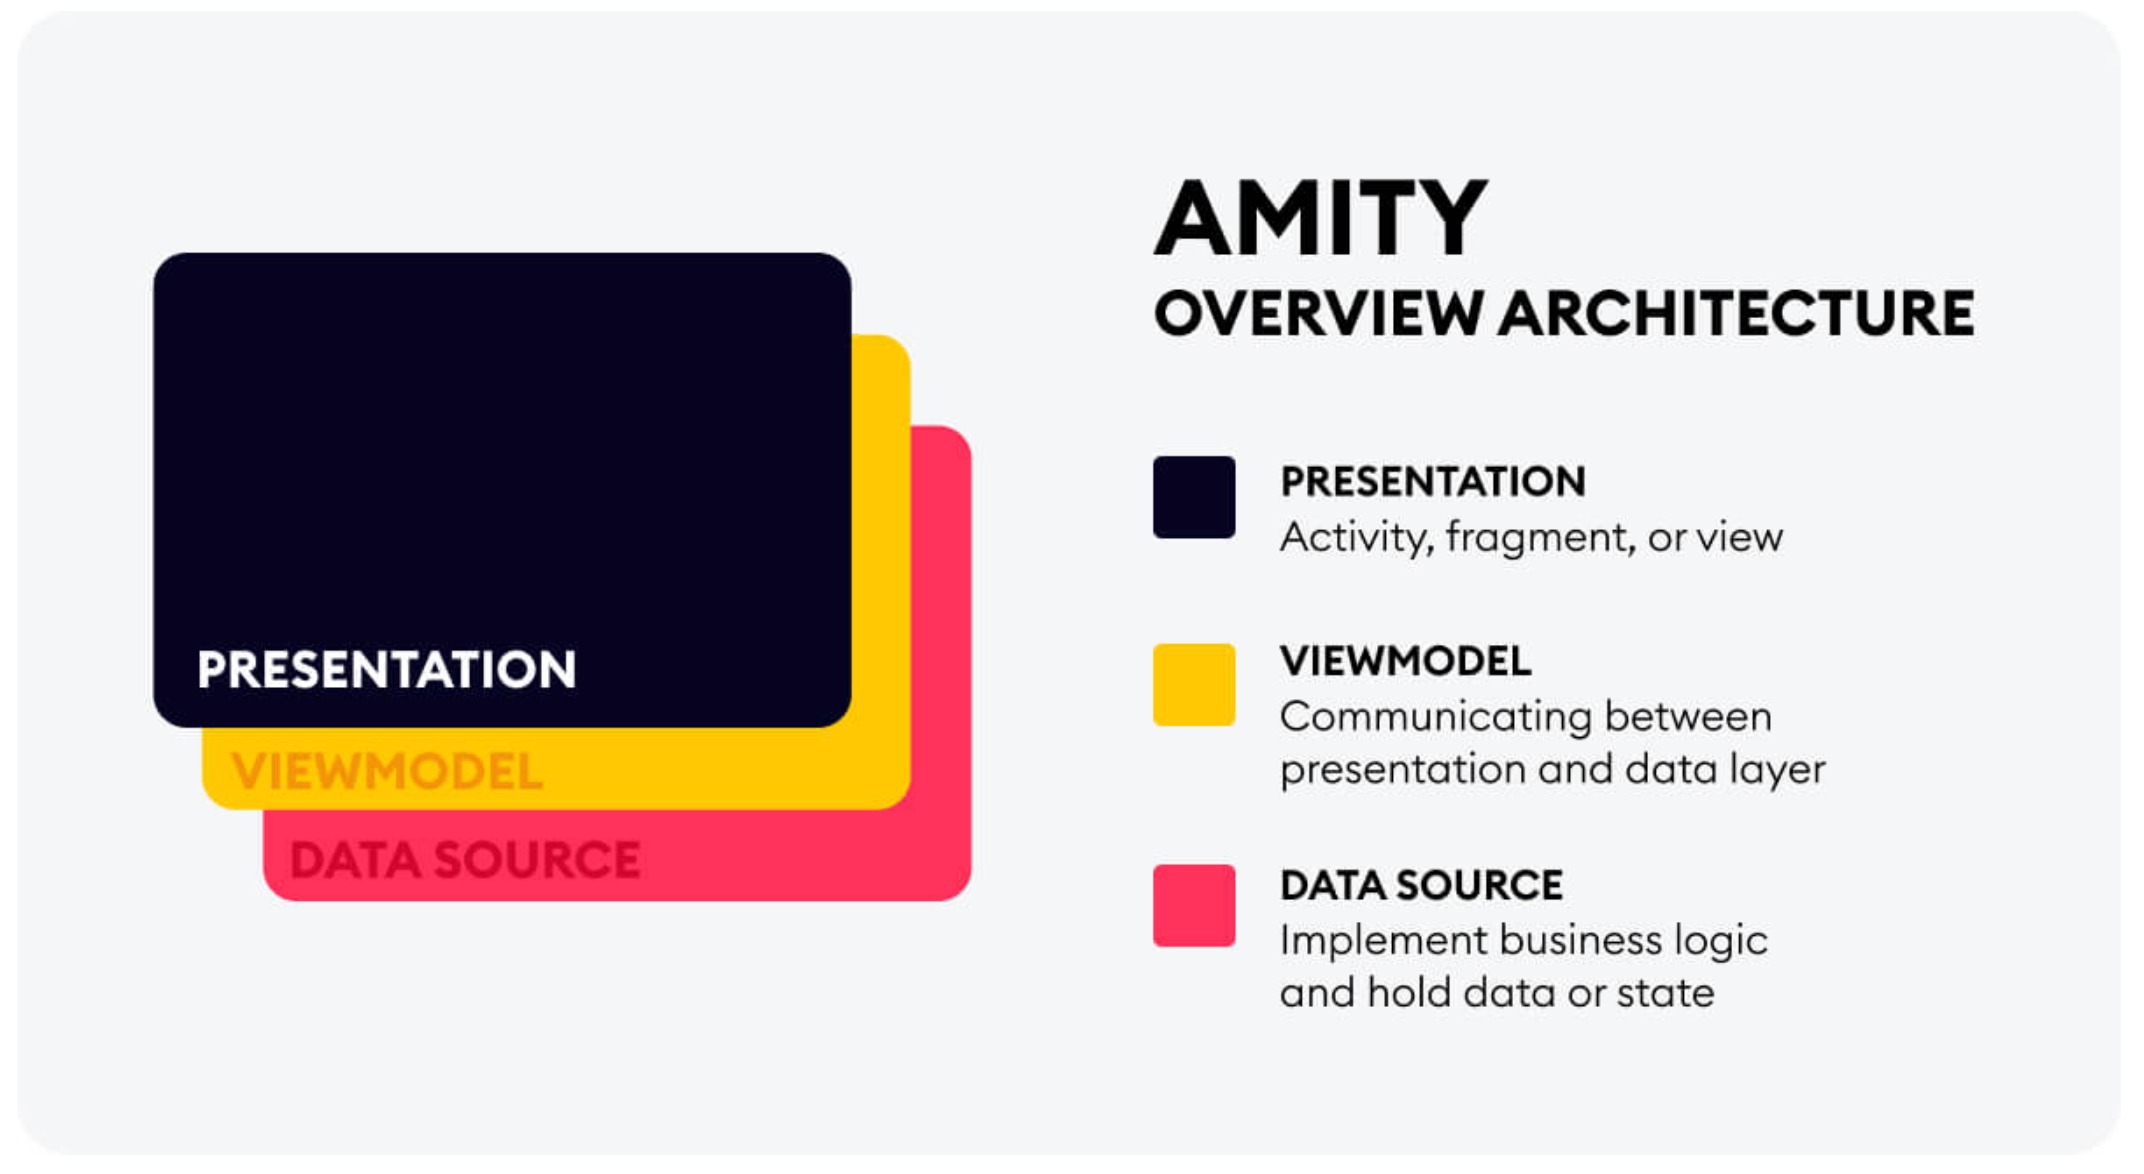 Amity overview architecture: presentation, viewmodel and data source